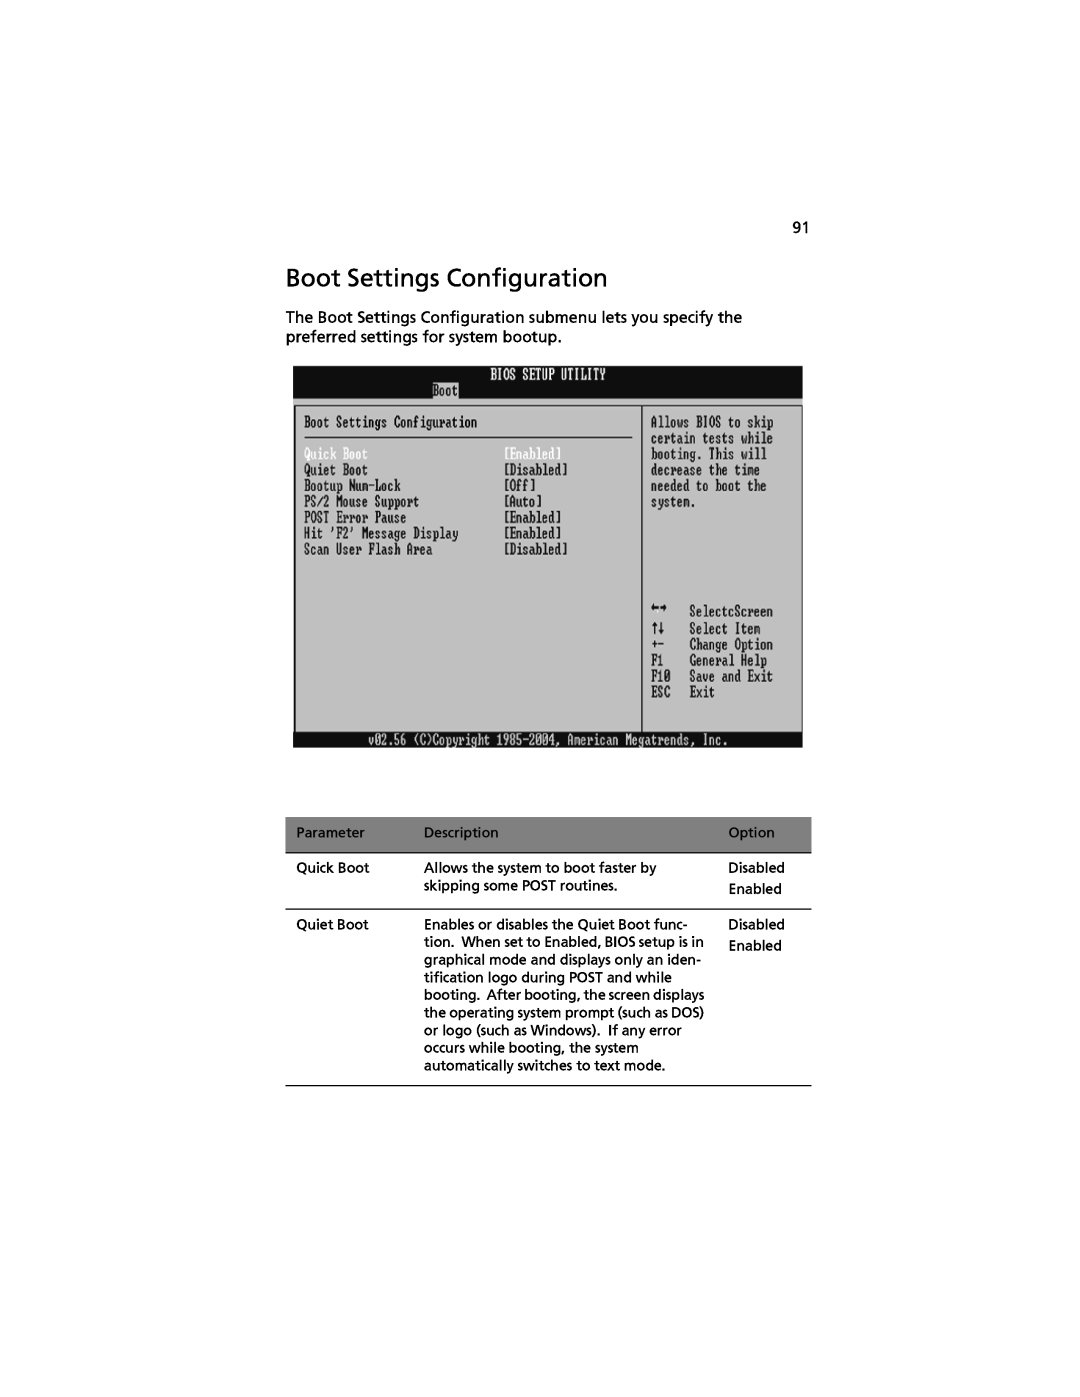 Acer G520 series manual Boot Settings Configuration 